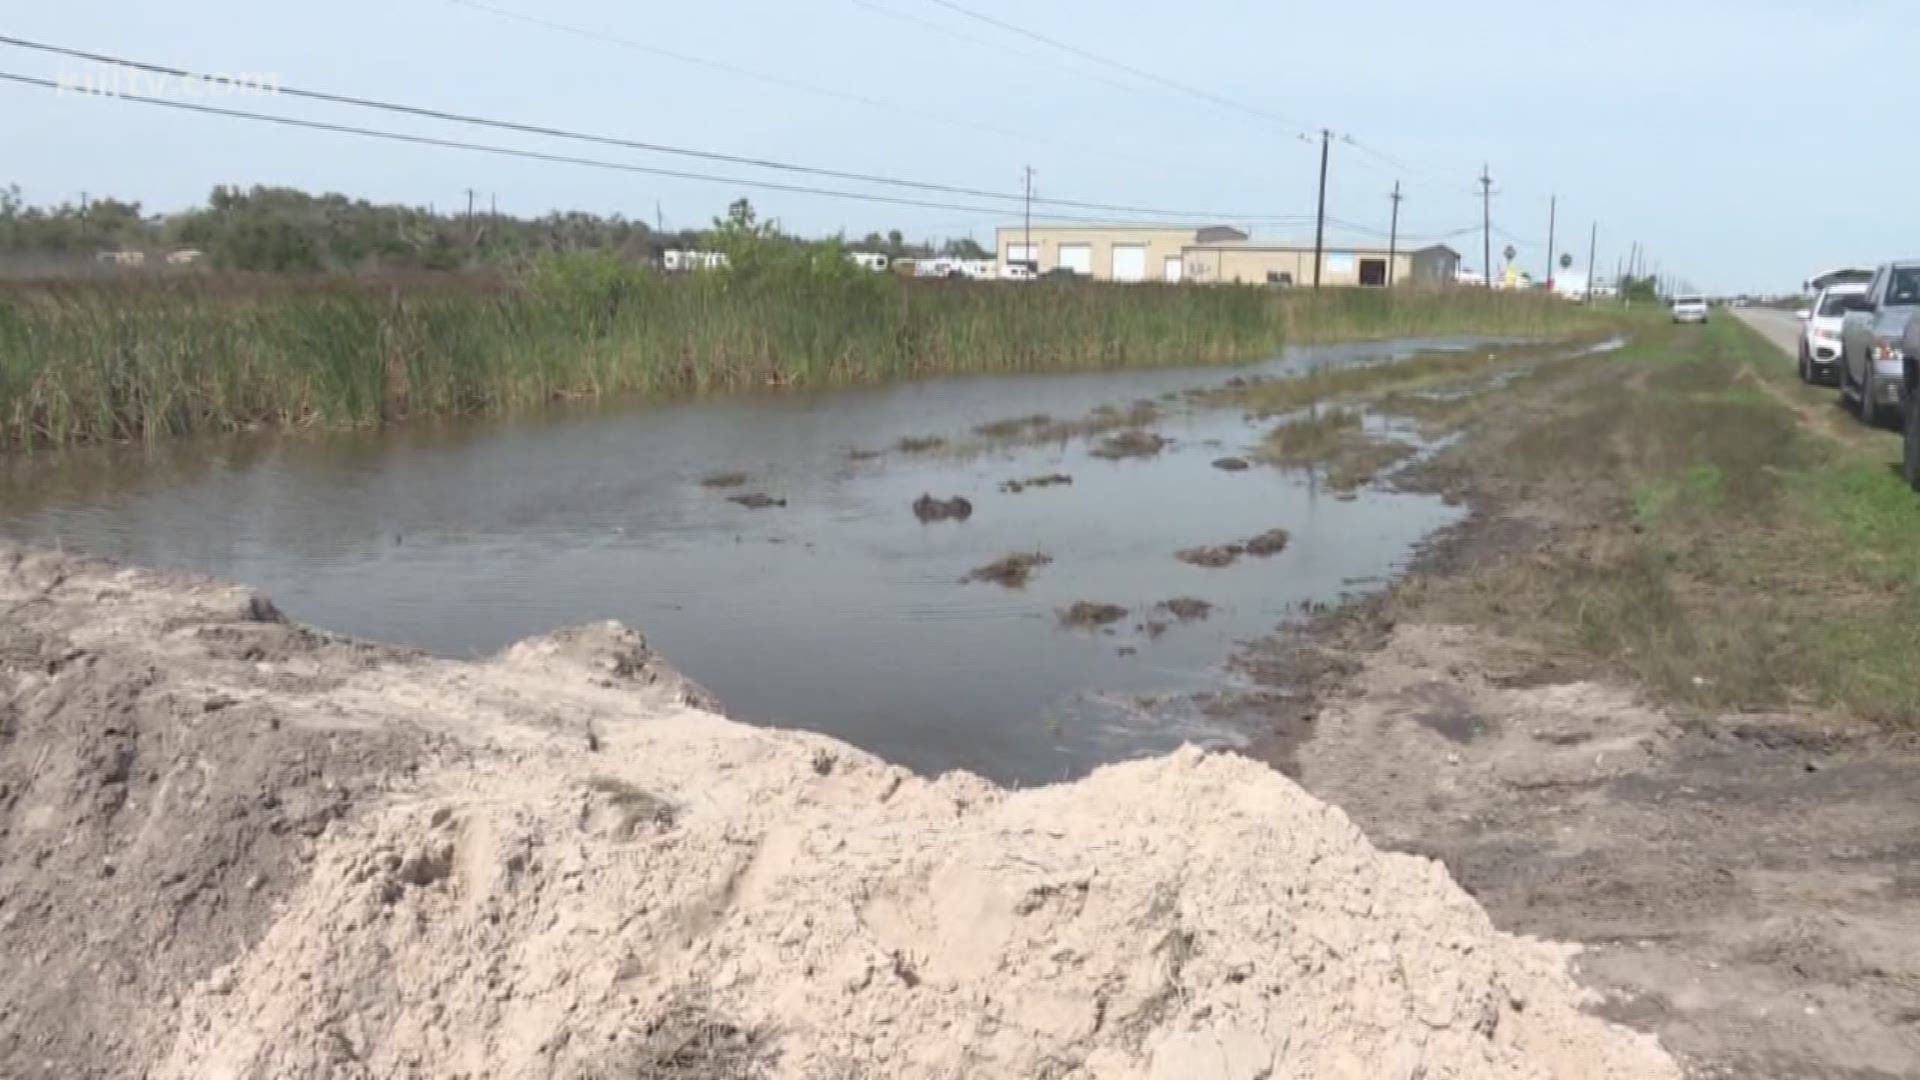 The City of Aransas Pass said they are currently using several different techniques to pinpoint where the leak is.